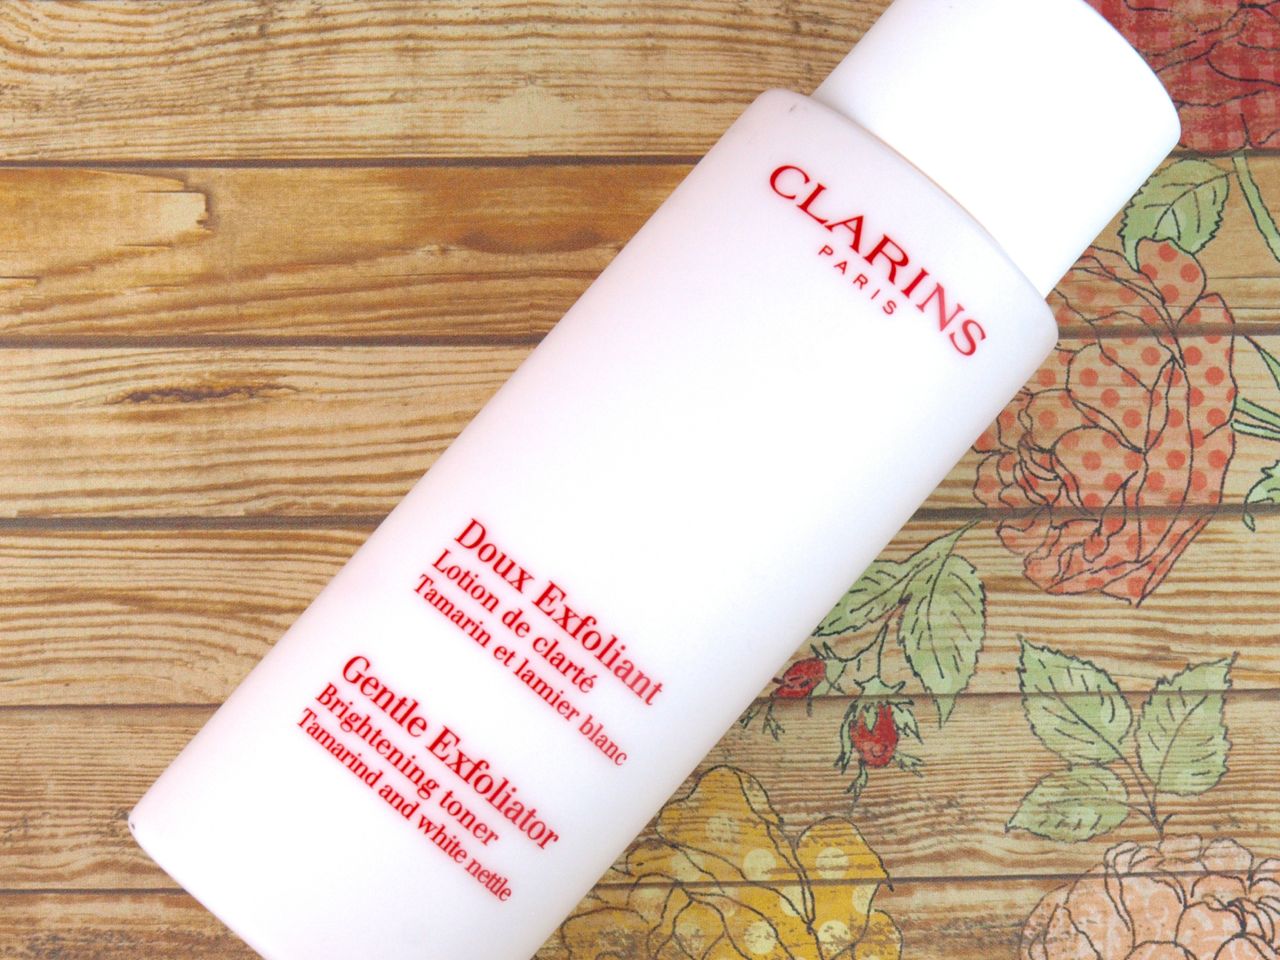 Clarins Gentle Exfoliator Brightening Toner: Review | The Sloths: and Skincare with Reviews and Swatches